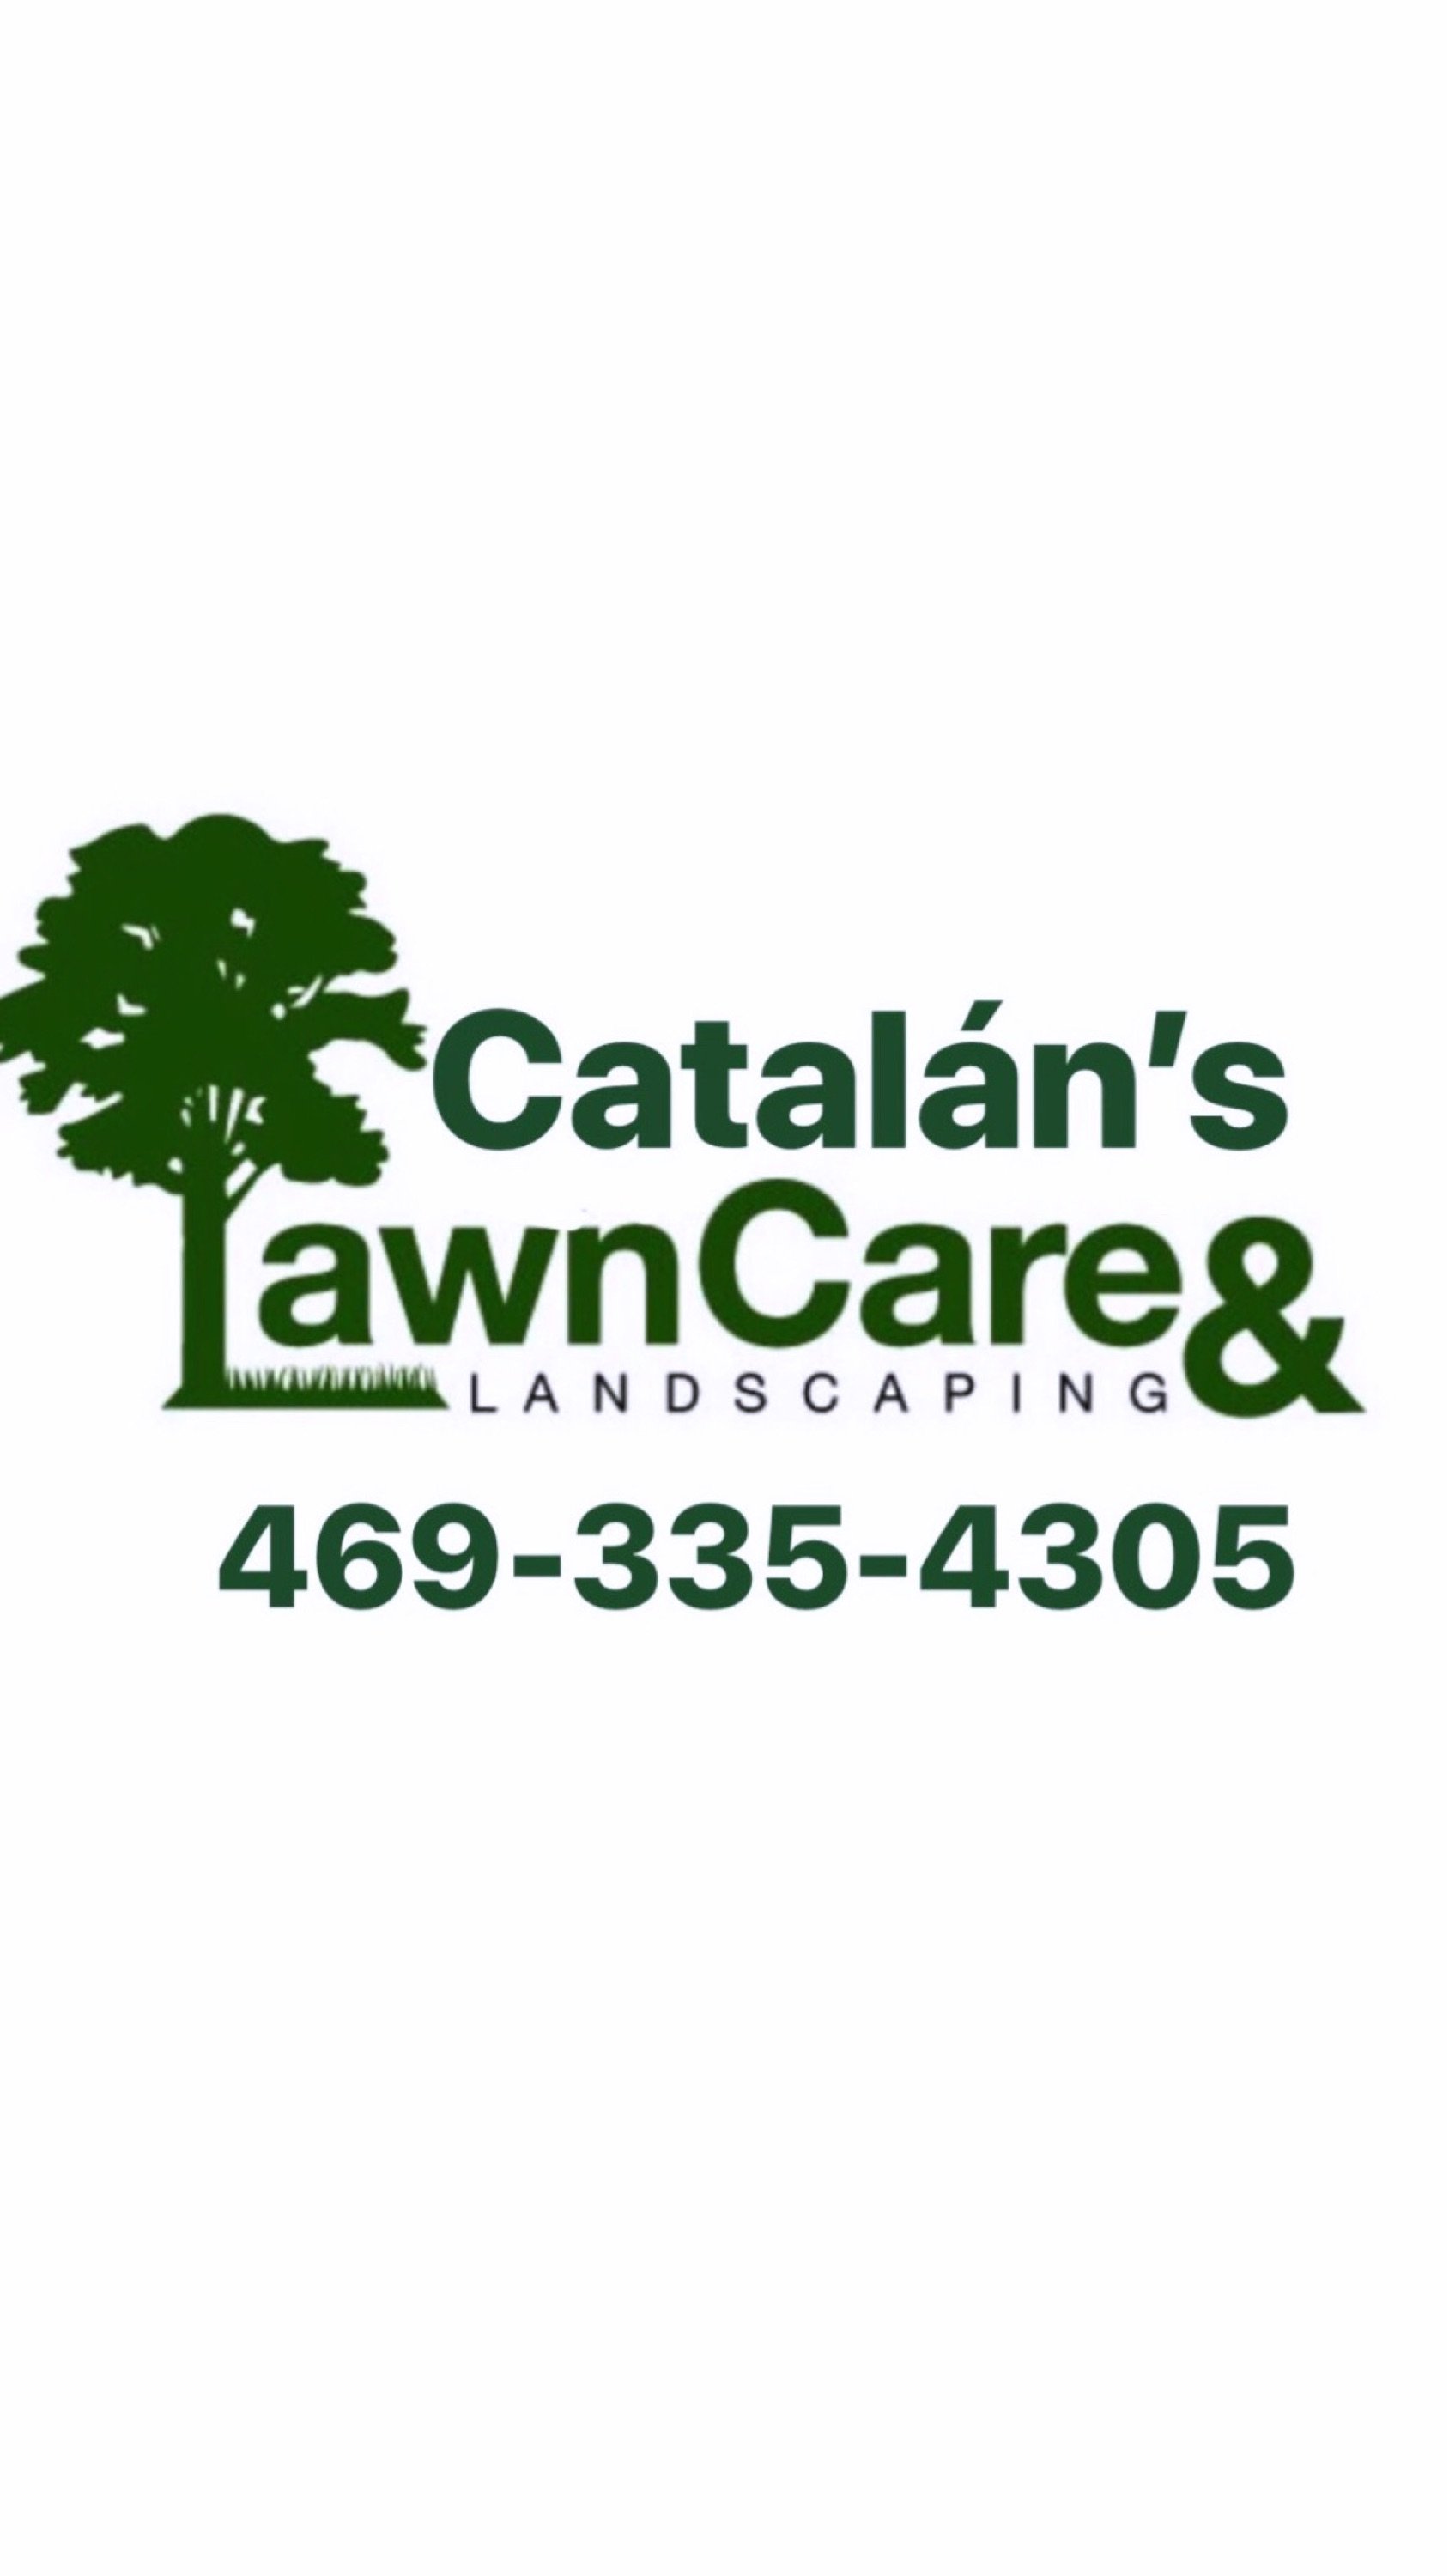 Catalan's Lawn Care & Landscaping Logo